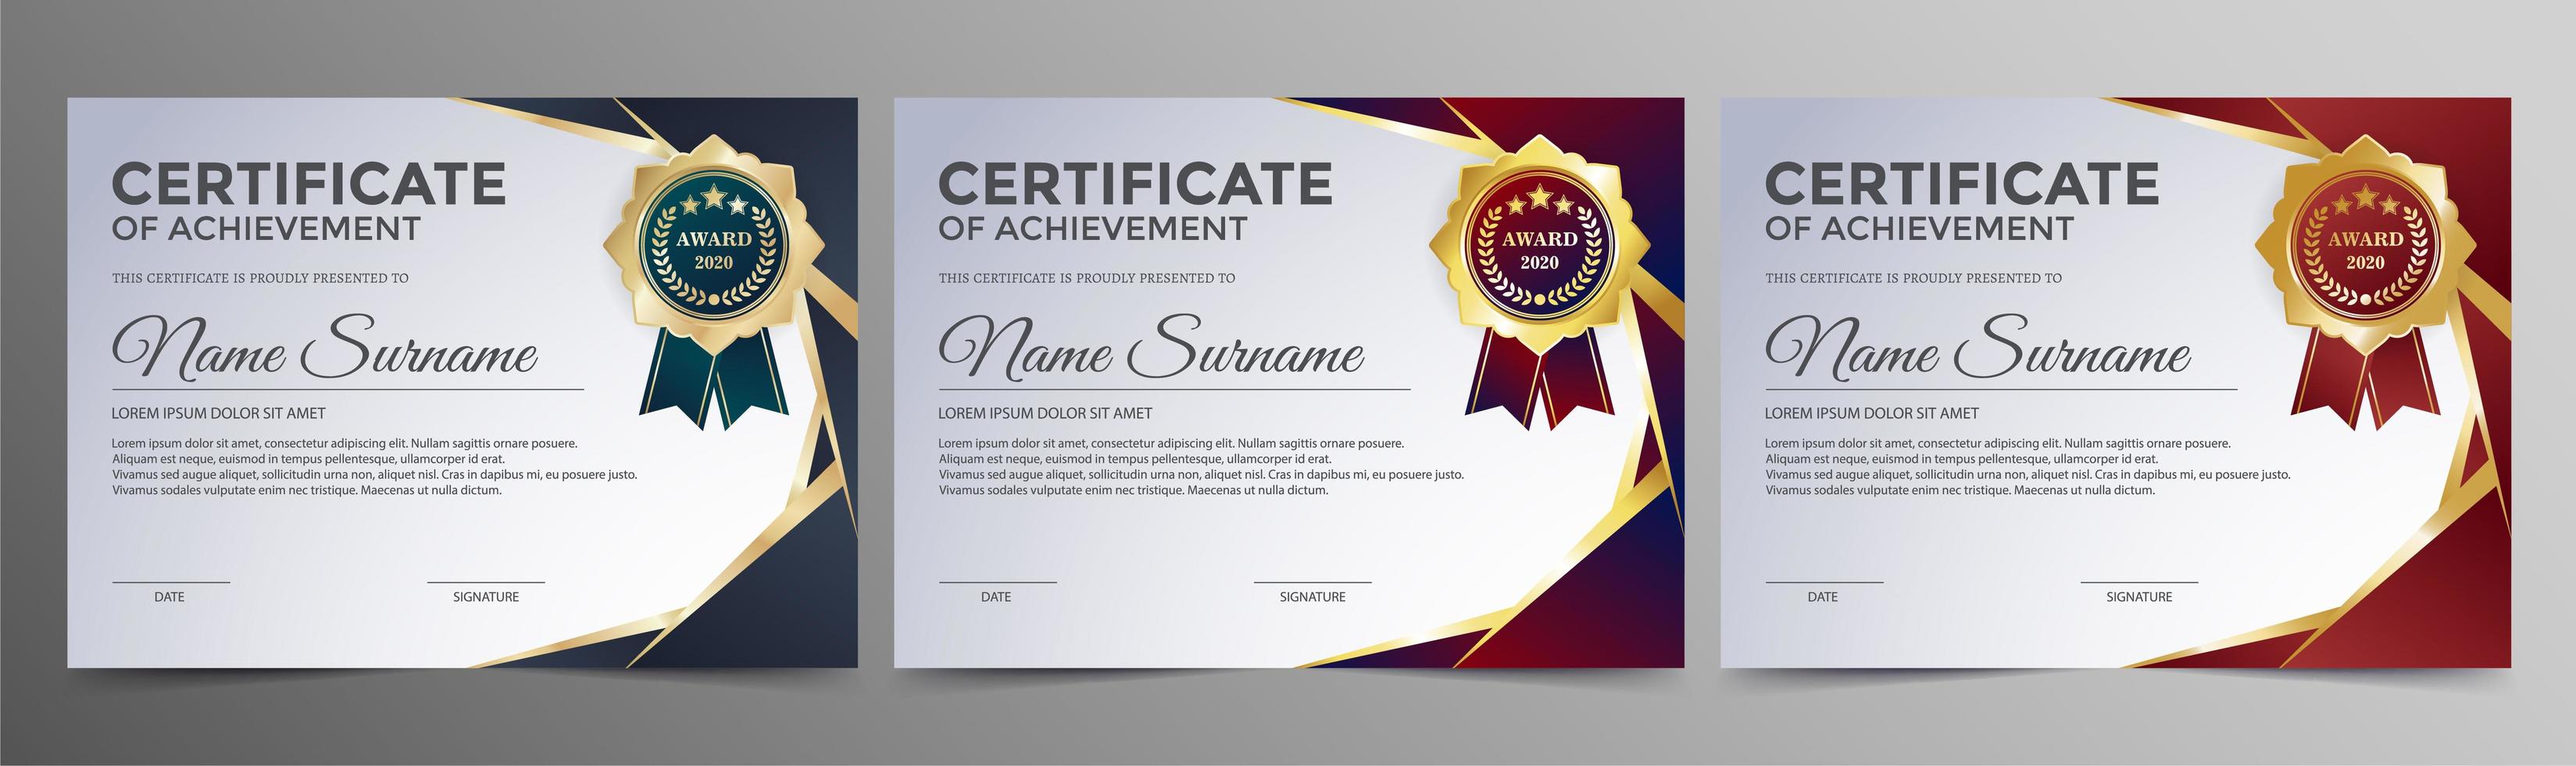 Achievement certificate with colorful angled layered corners vector